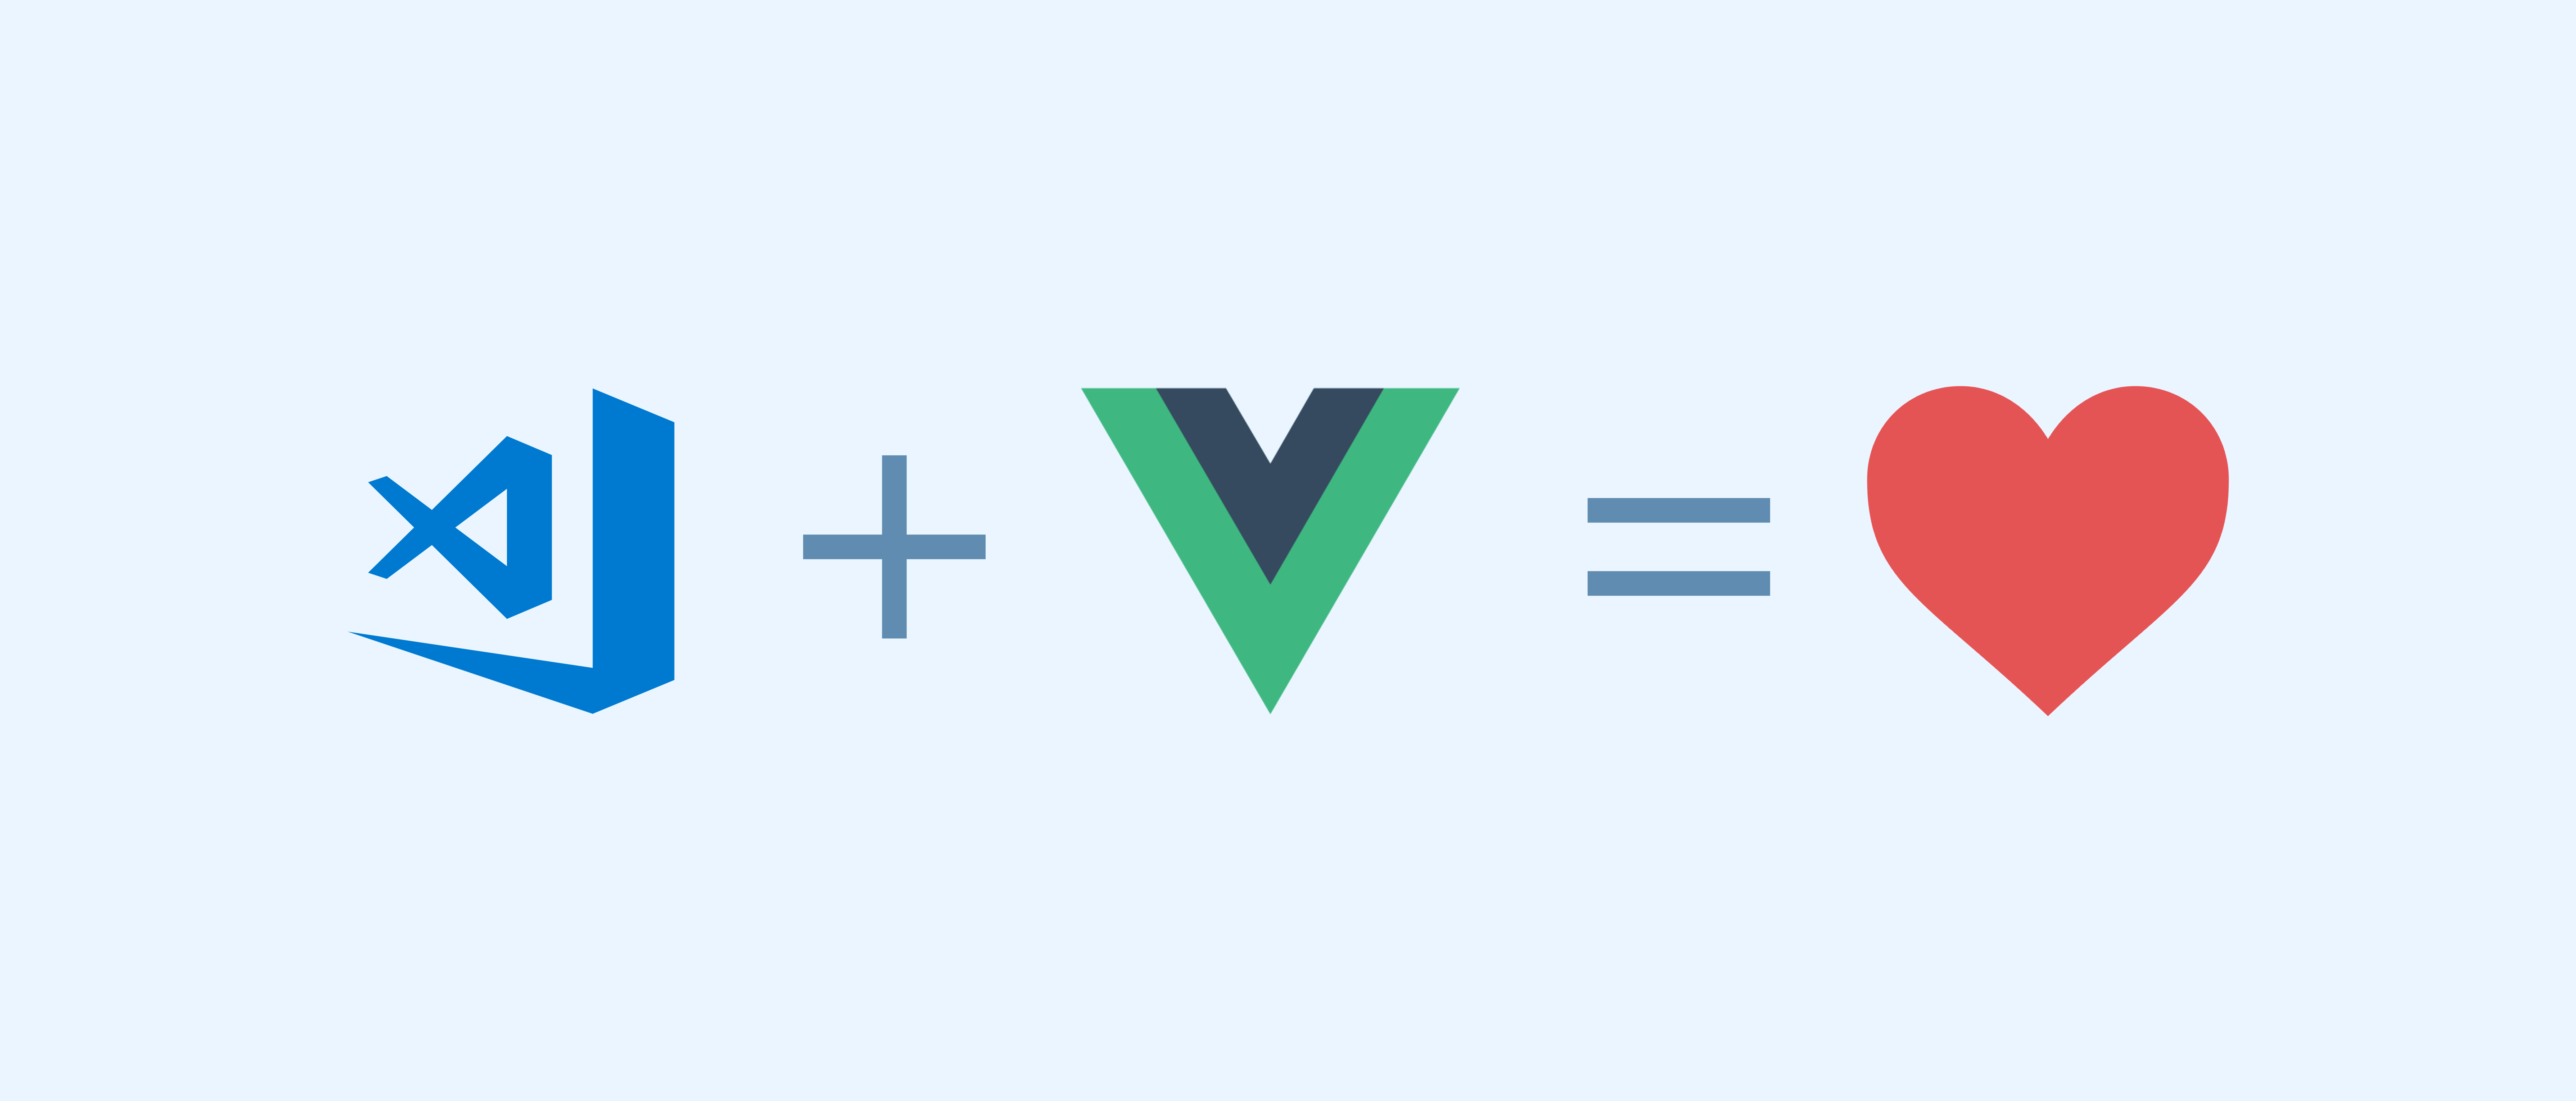 How to import vue js project in visual studio code